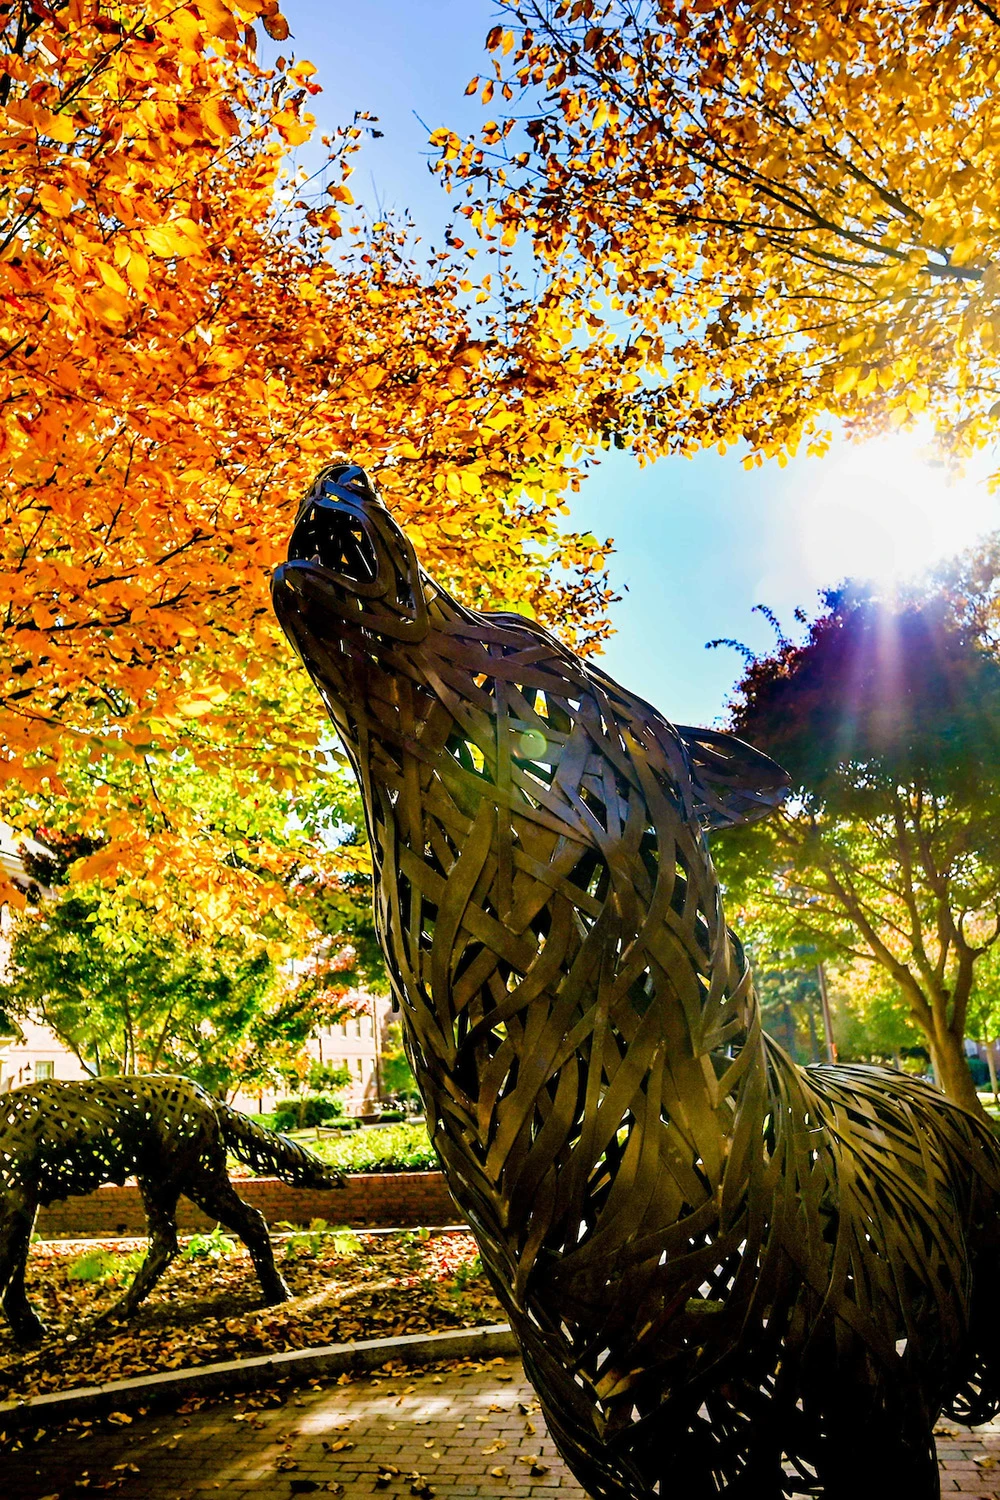 A copper wolf surrounded by trees with vibrant fall colors.